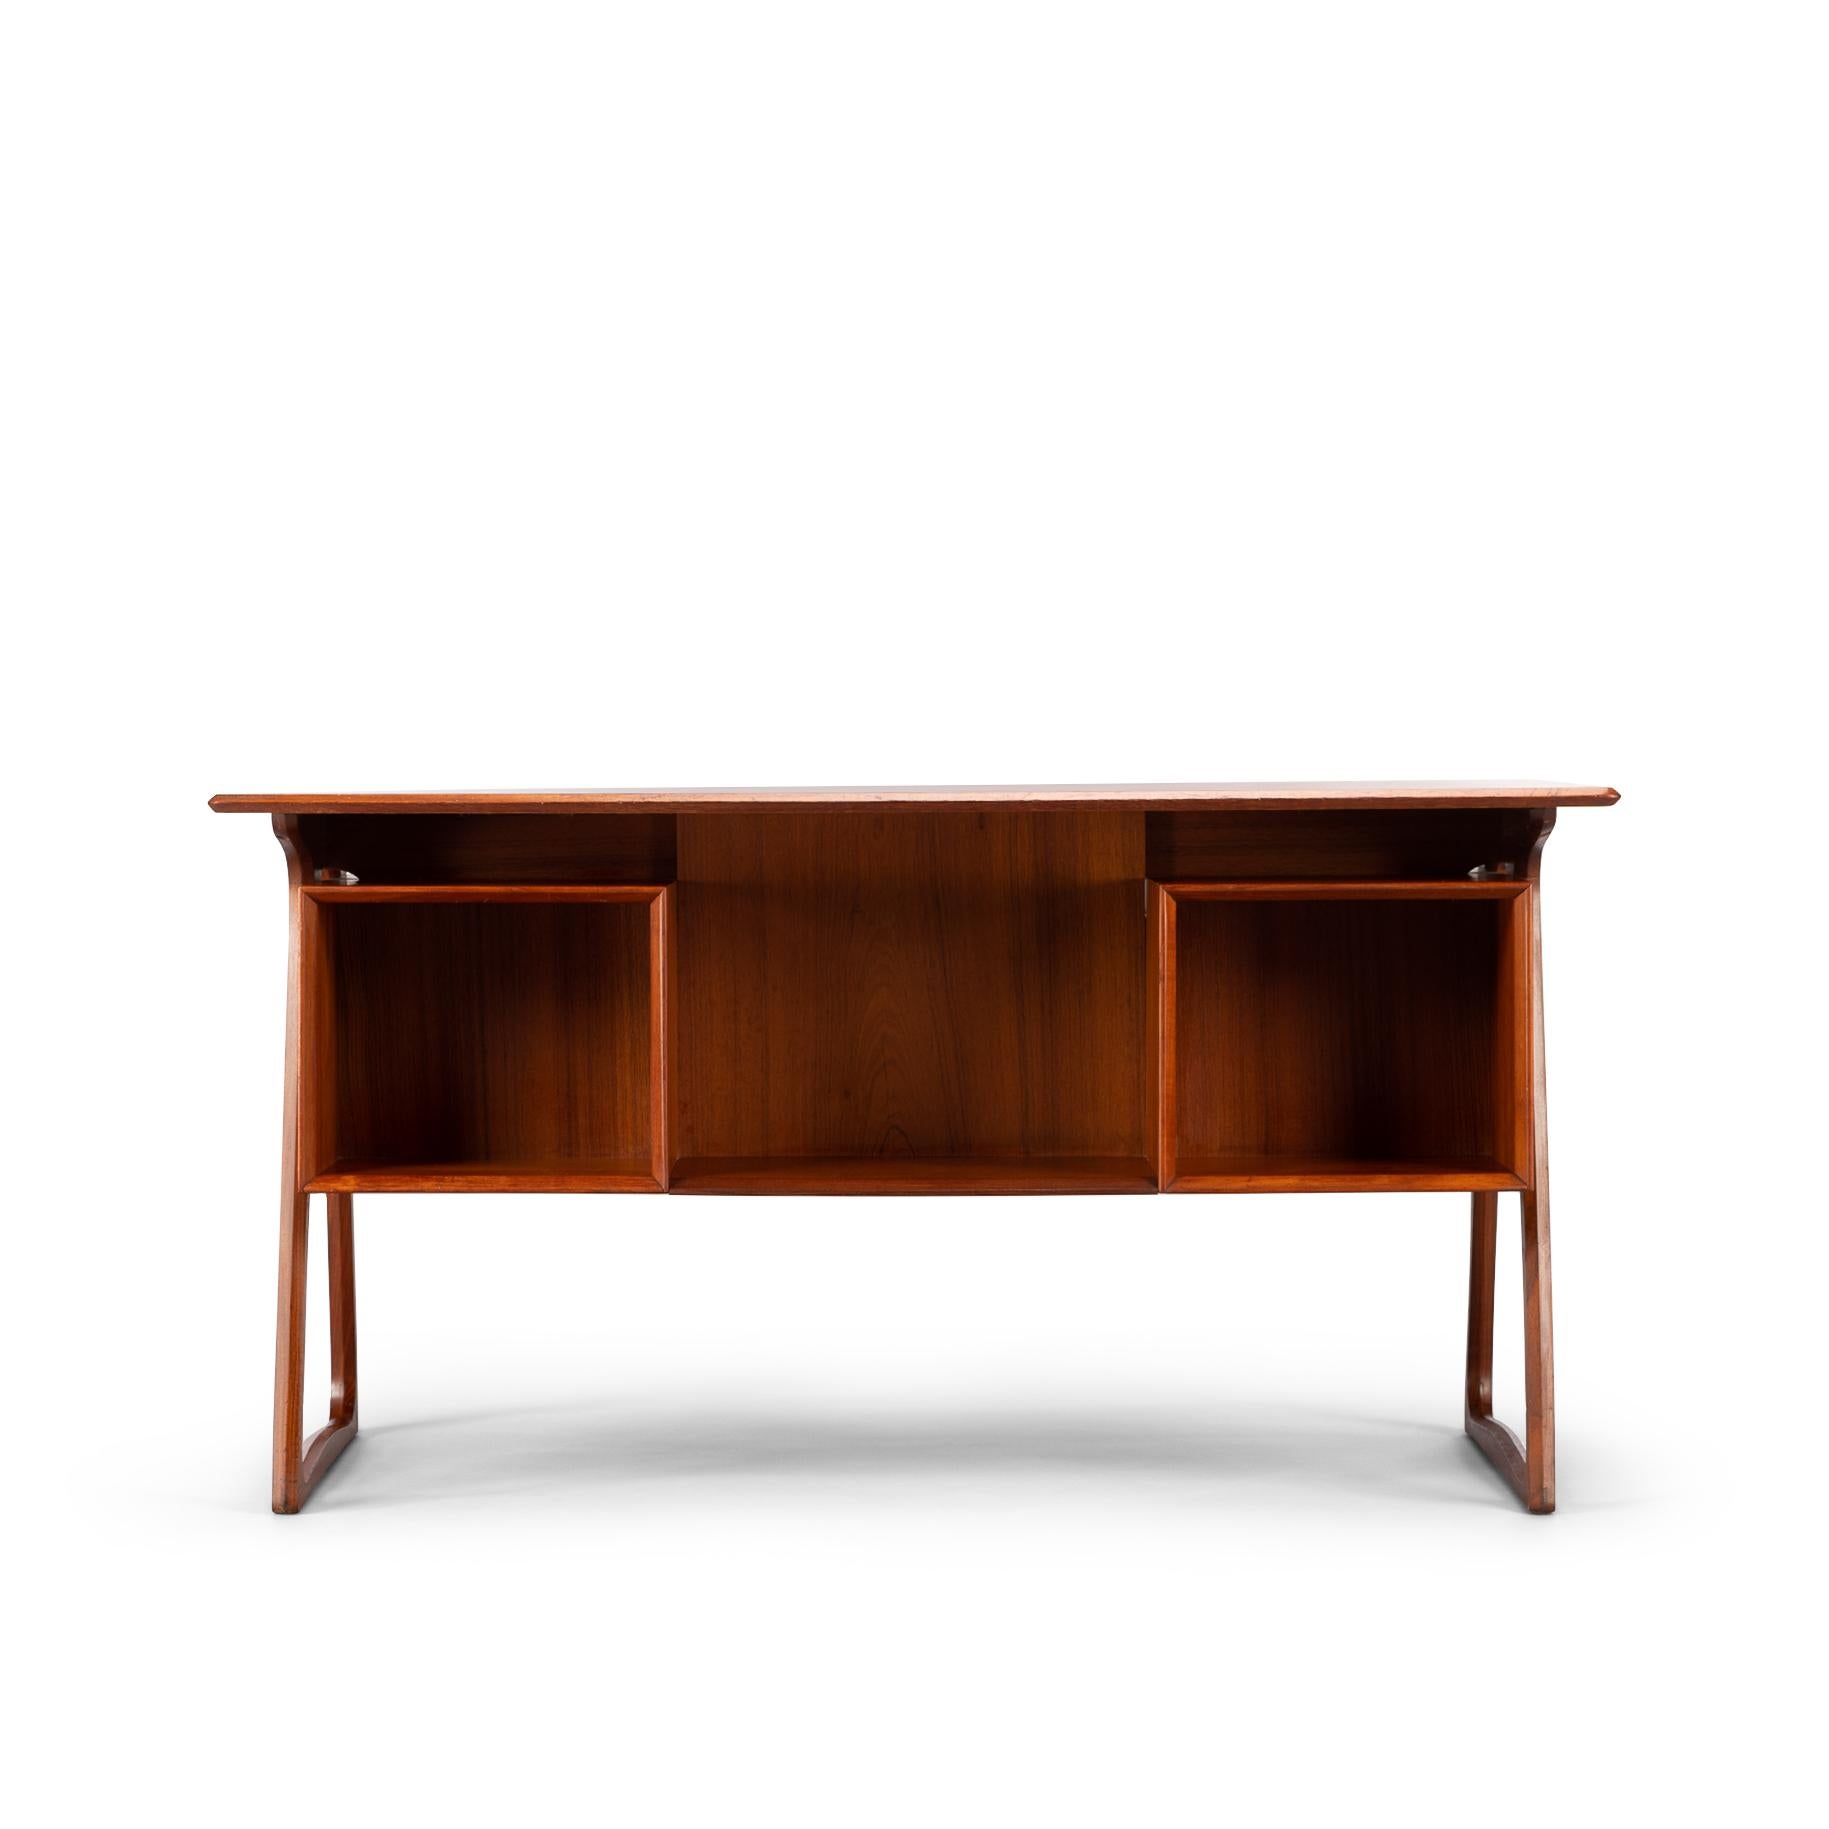 This desk in teak of which the manufacture is attributed to Sibast møbler is of simple yet elegant and functional design. Most pronounced are the sides of the desk which are delta shaped and uphold the drawer blocks with three drawers each and the